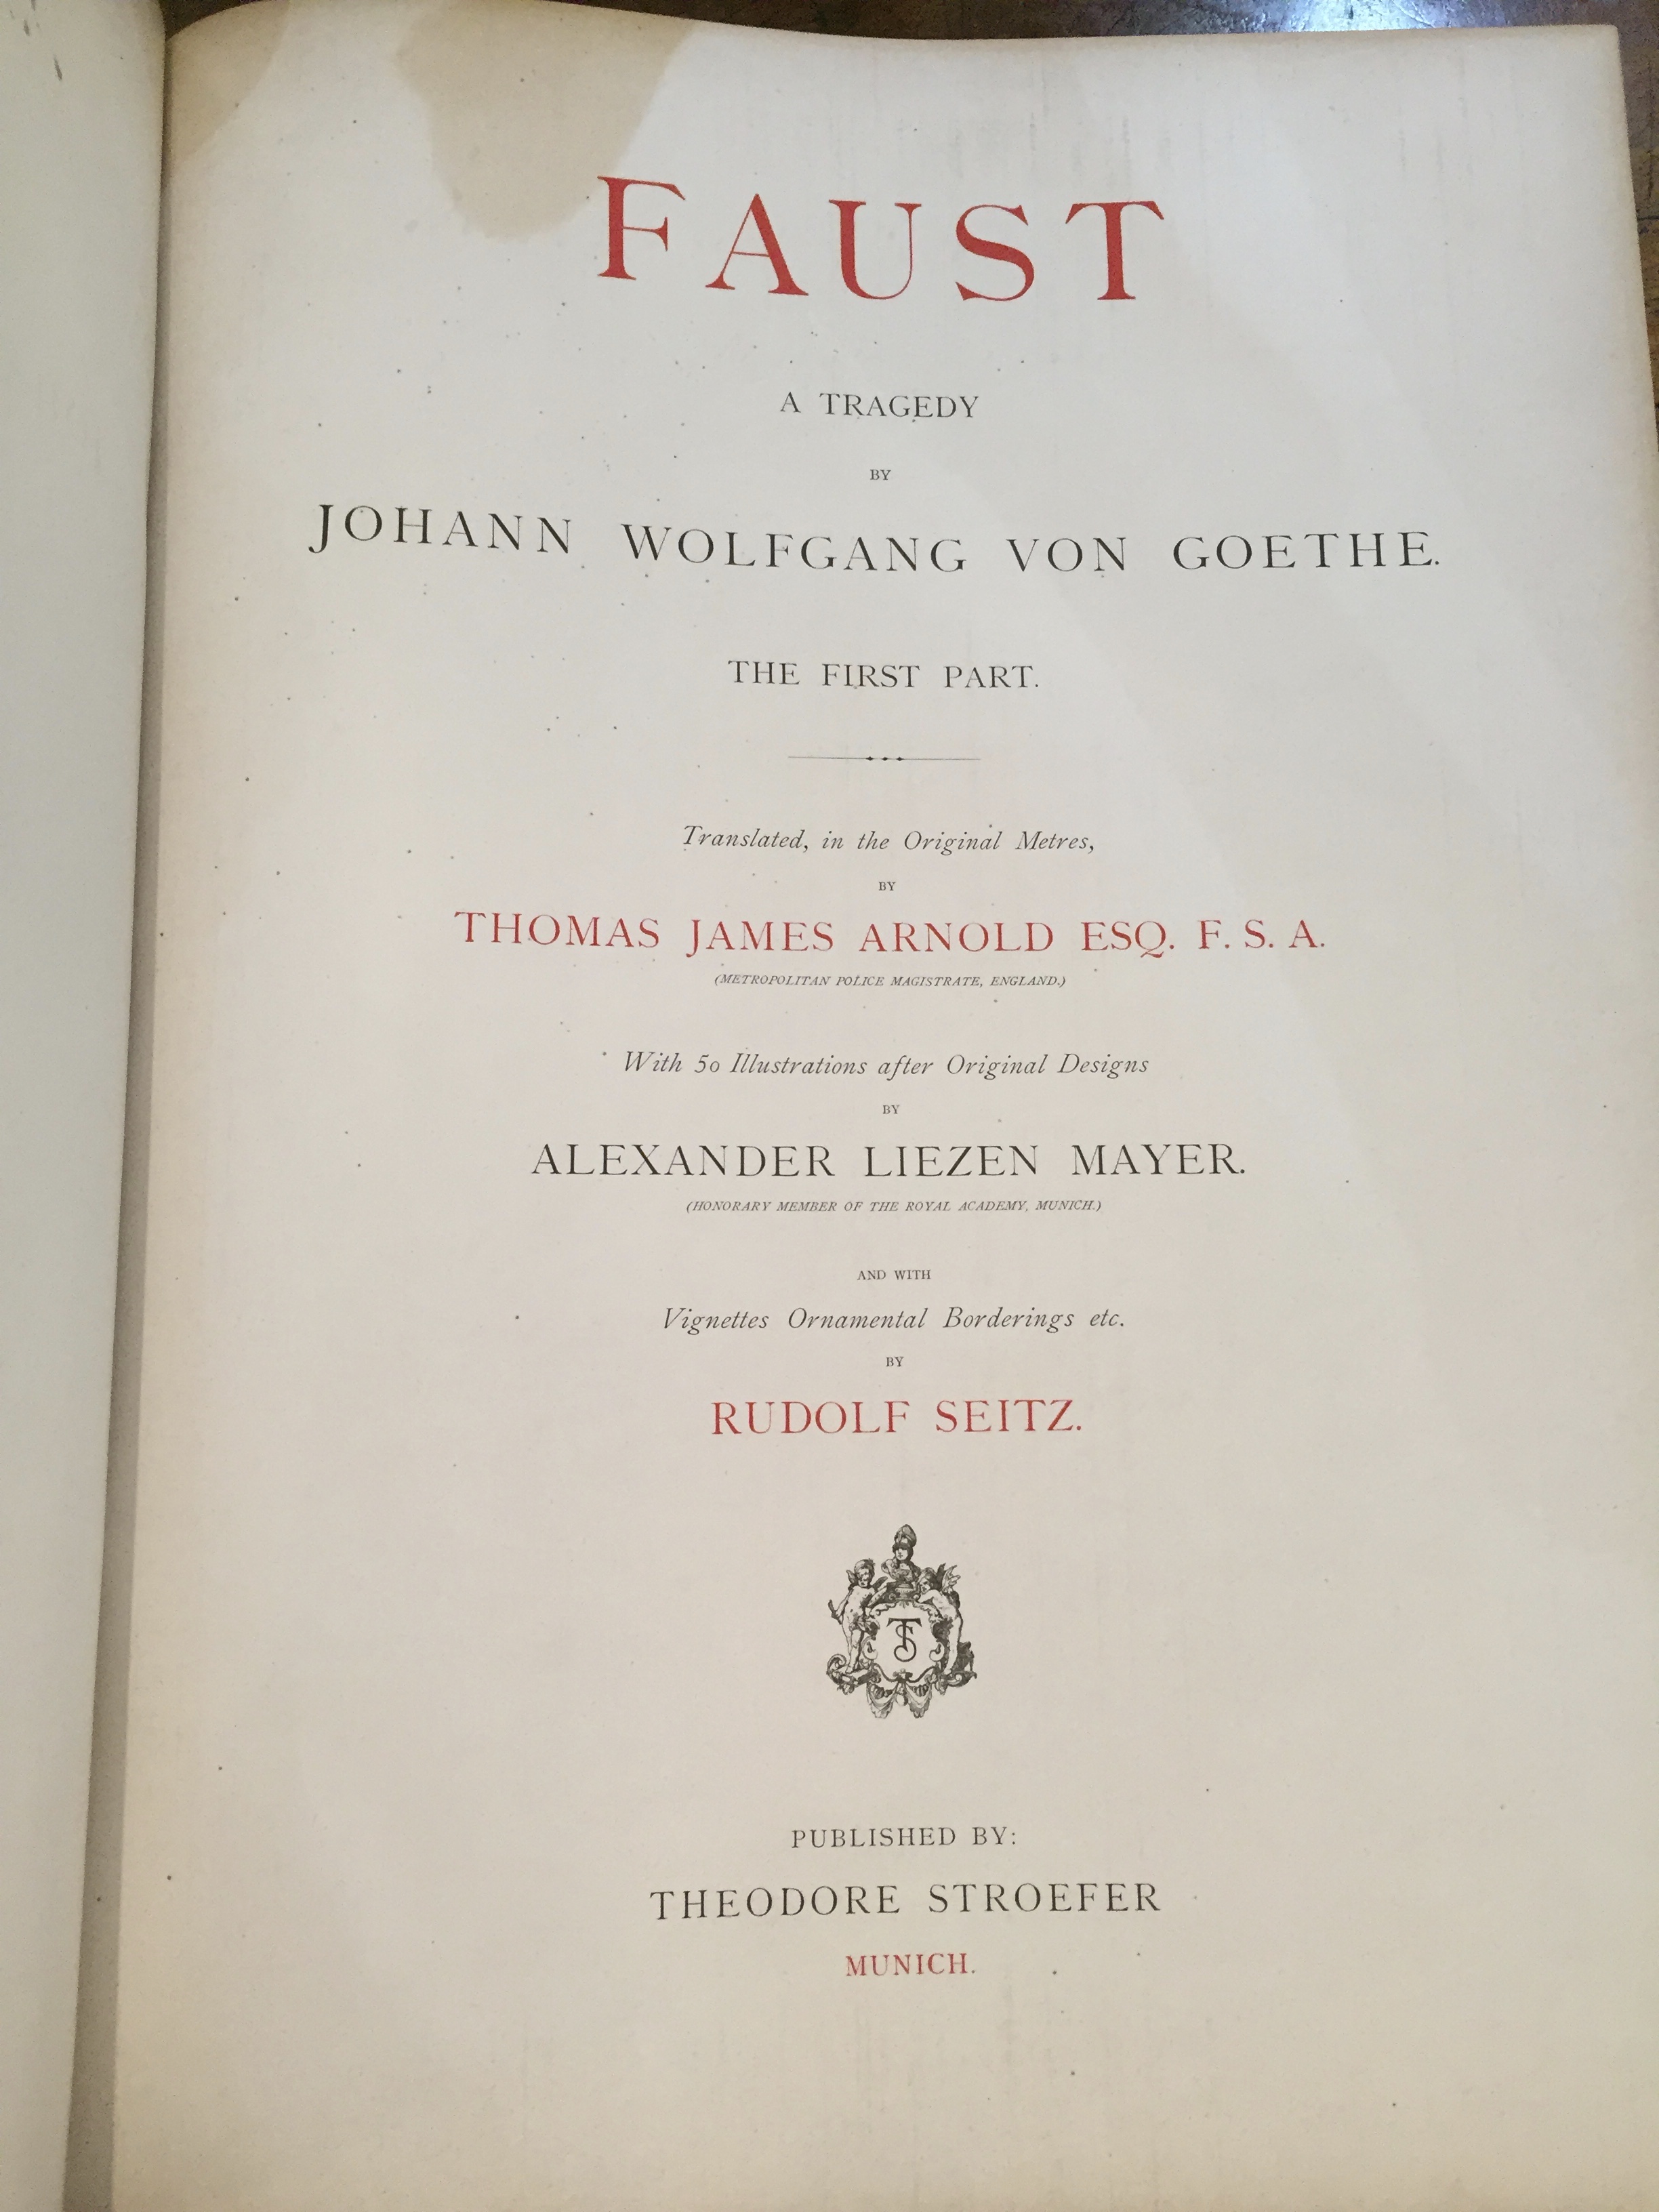 Leather Edition of “Faust: A Tragedy” by Johann Wolfgang von Goethe  (SOLD)